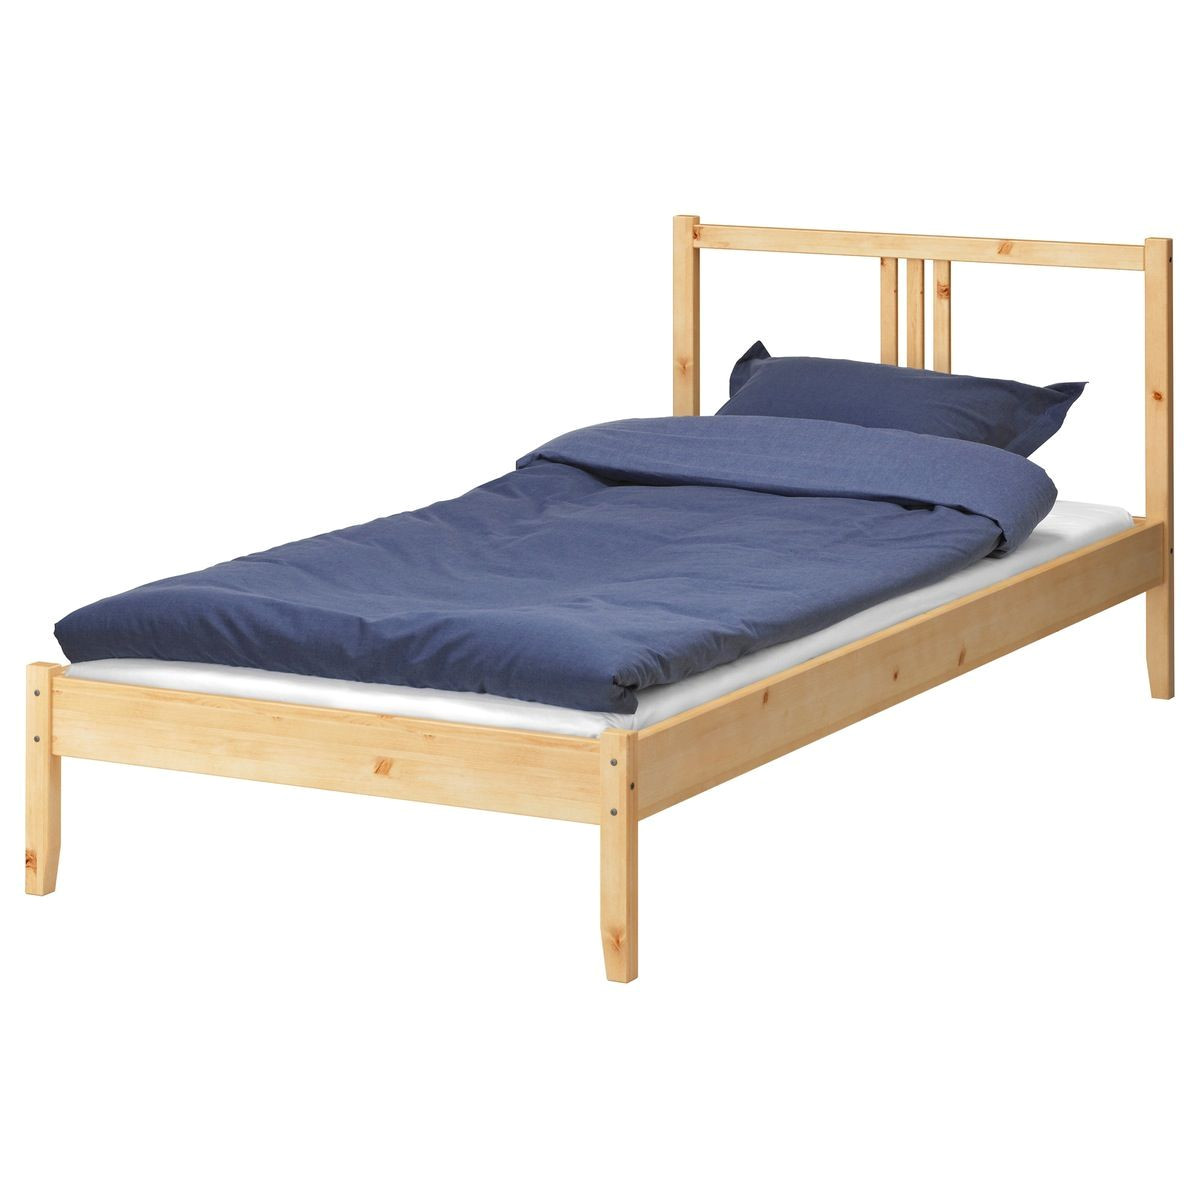 a serious style upgrade for a 40 ikea bed bedrooms bed frame